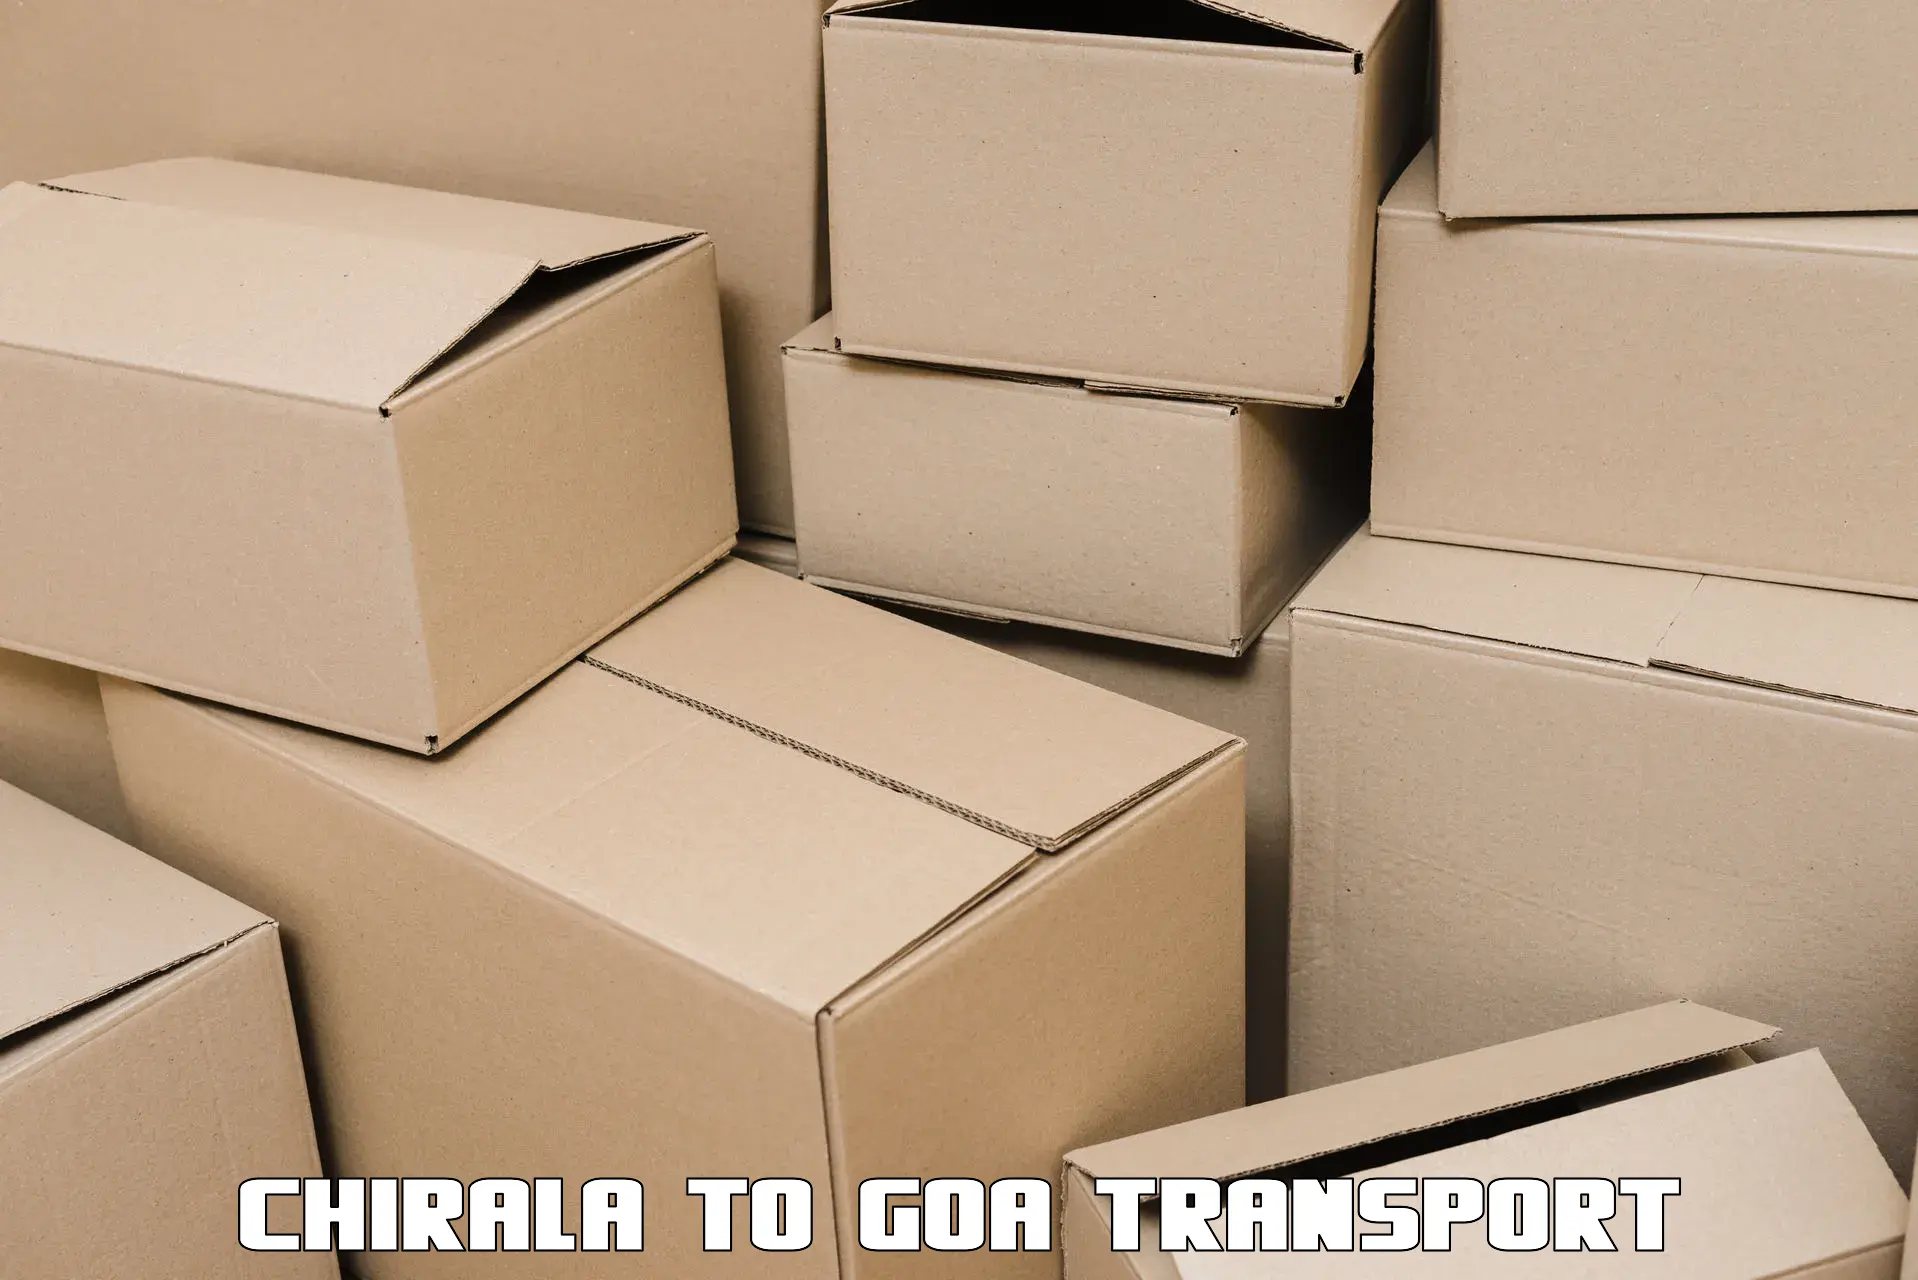 Transport bike from one state to another Chirala to IIT Goa